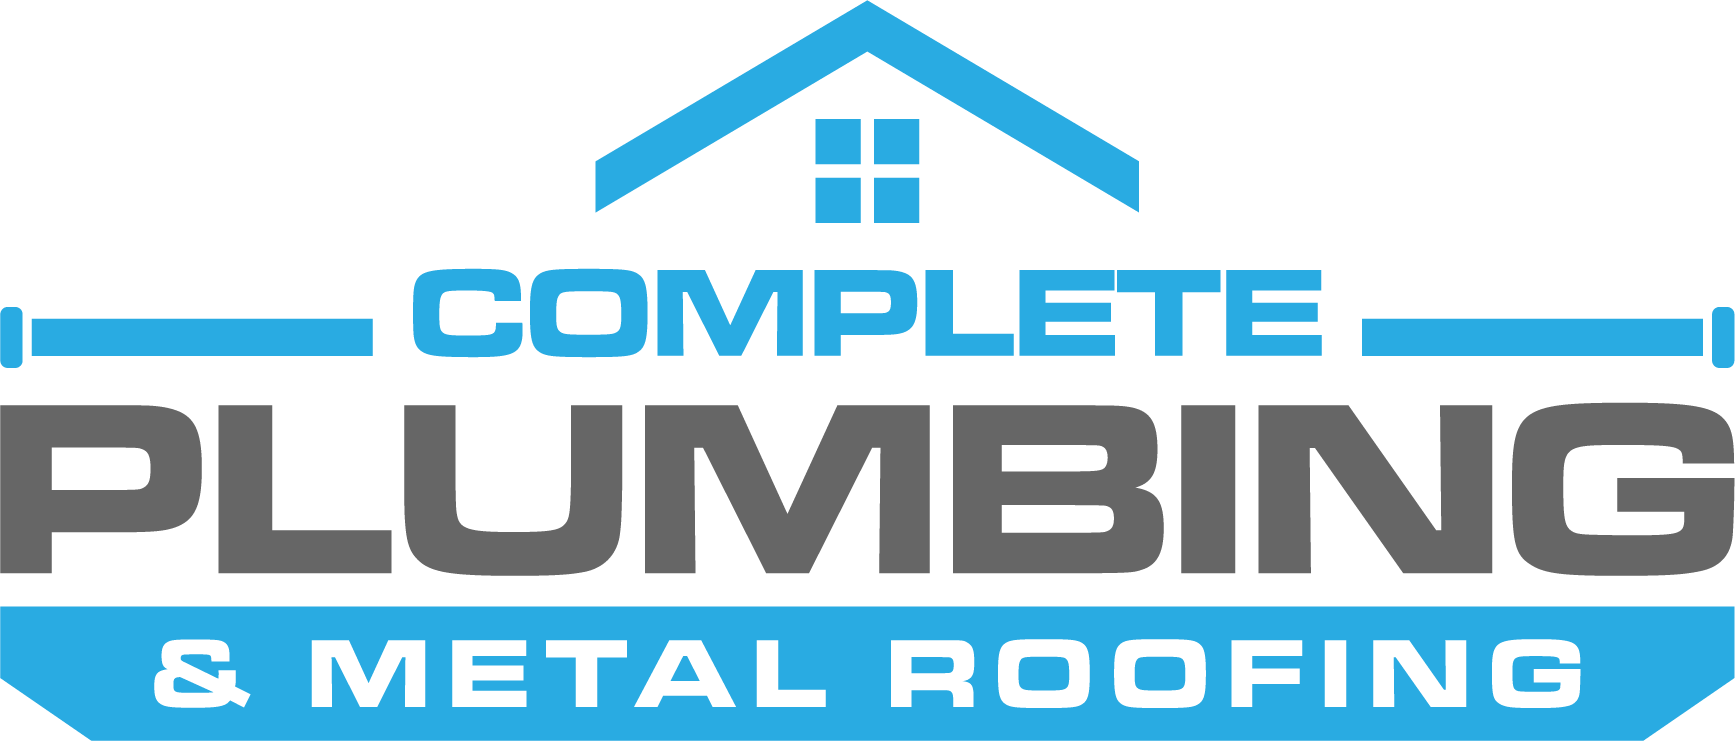 Complete Plumbing and Metal Roofing